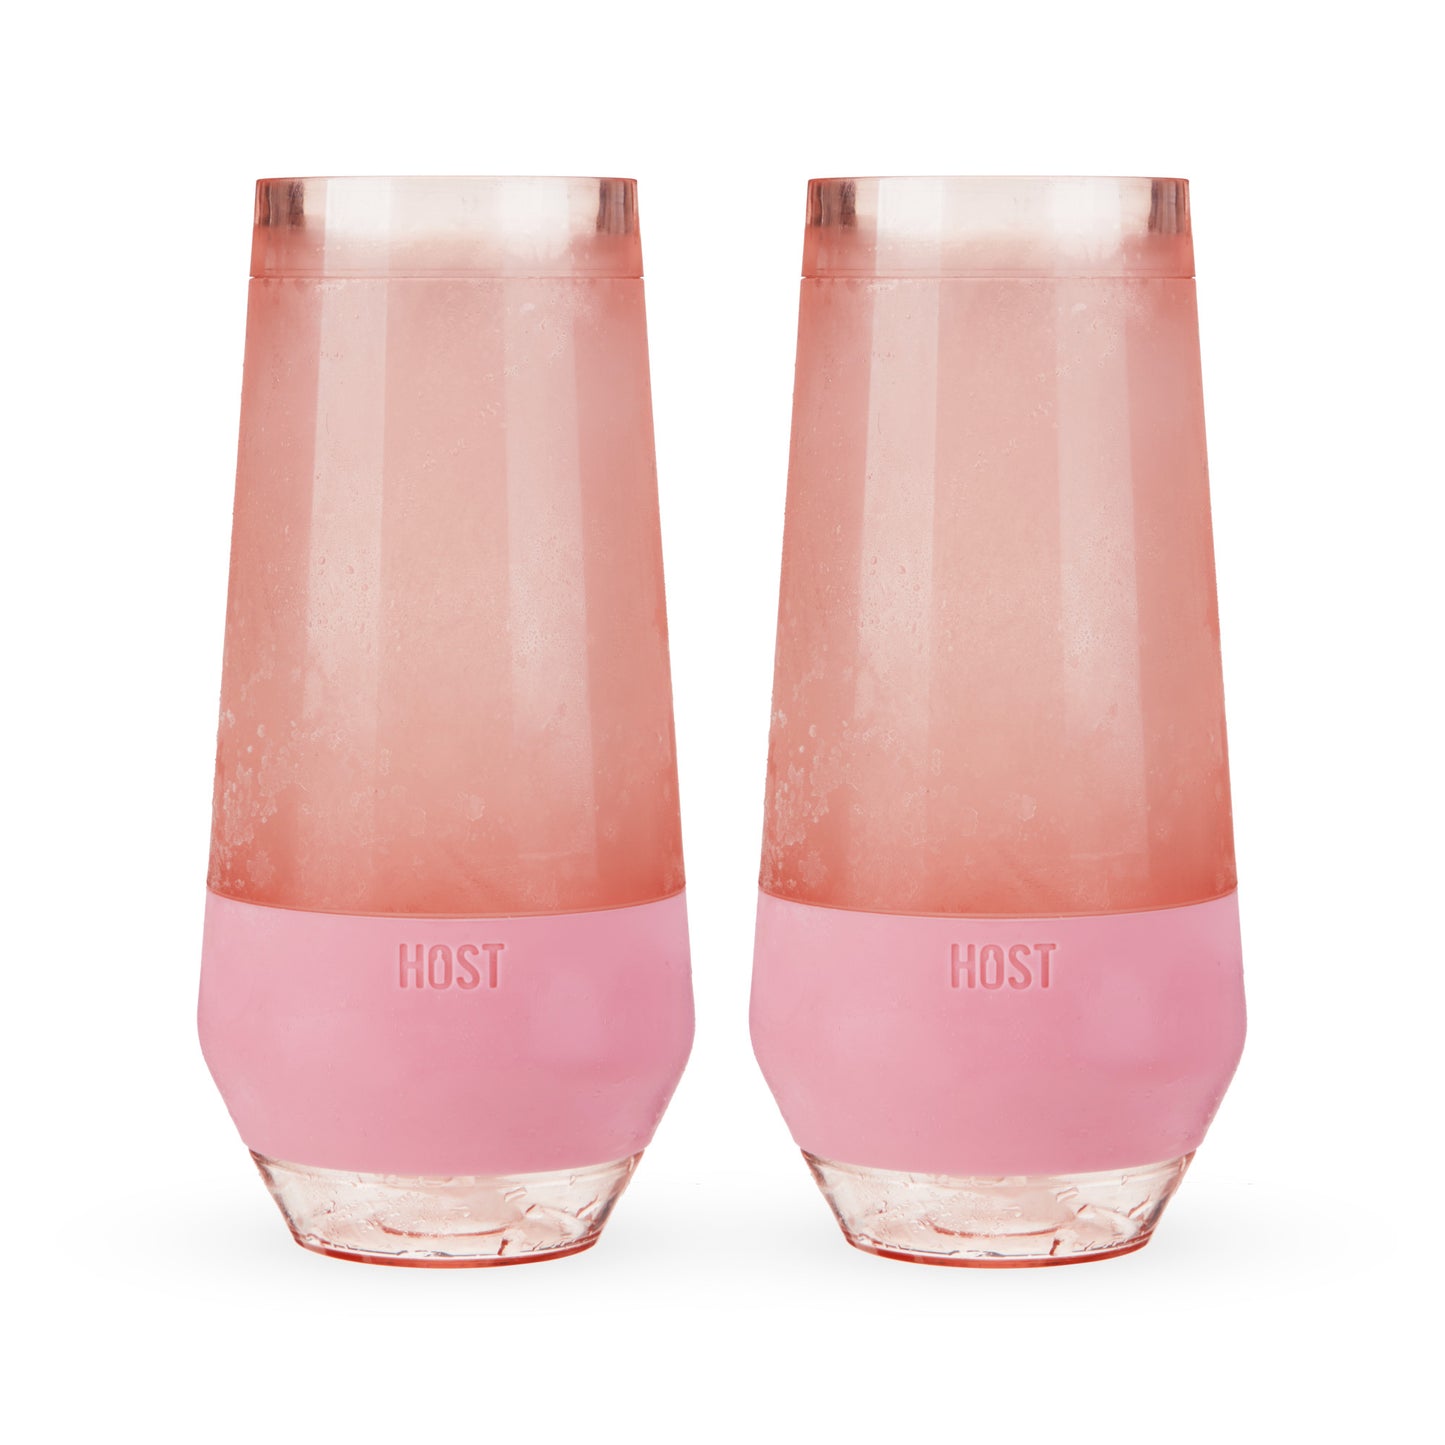 Champagne FREEZE™ in Blush Tint (set of 2)